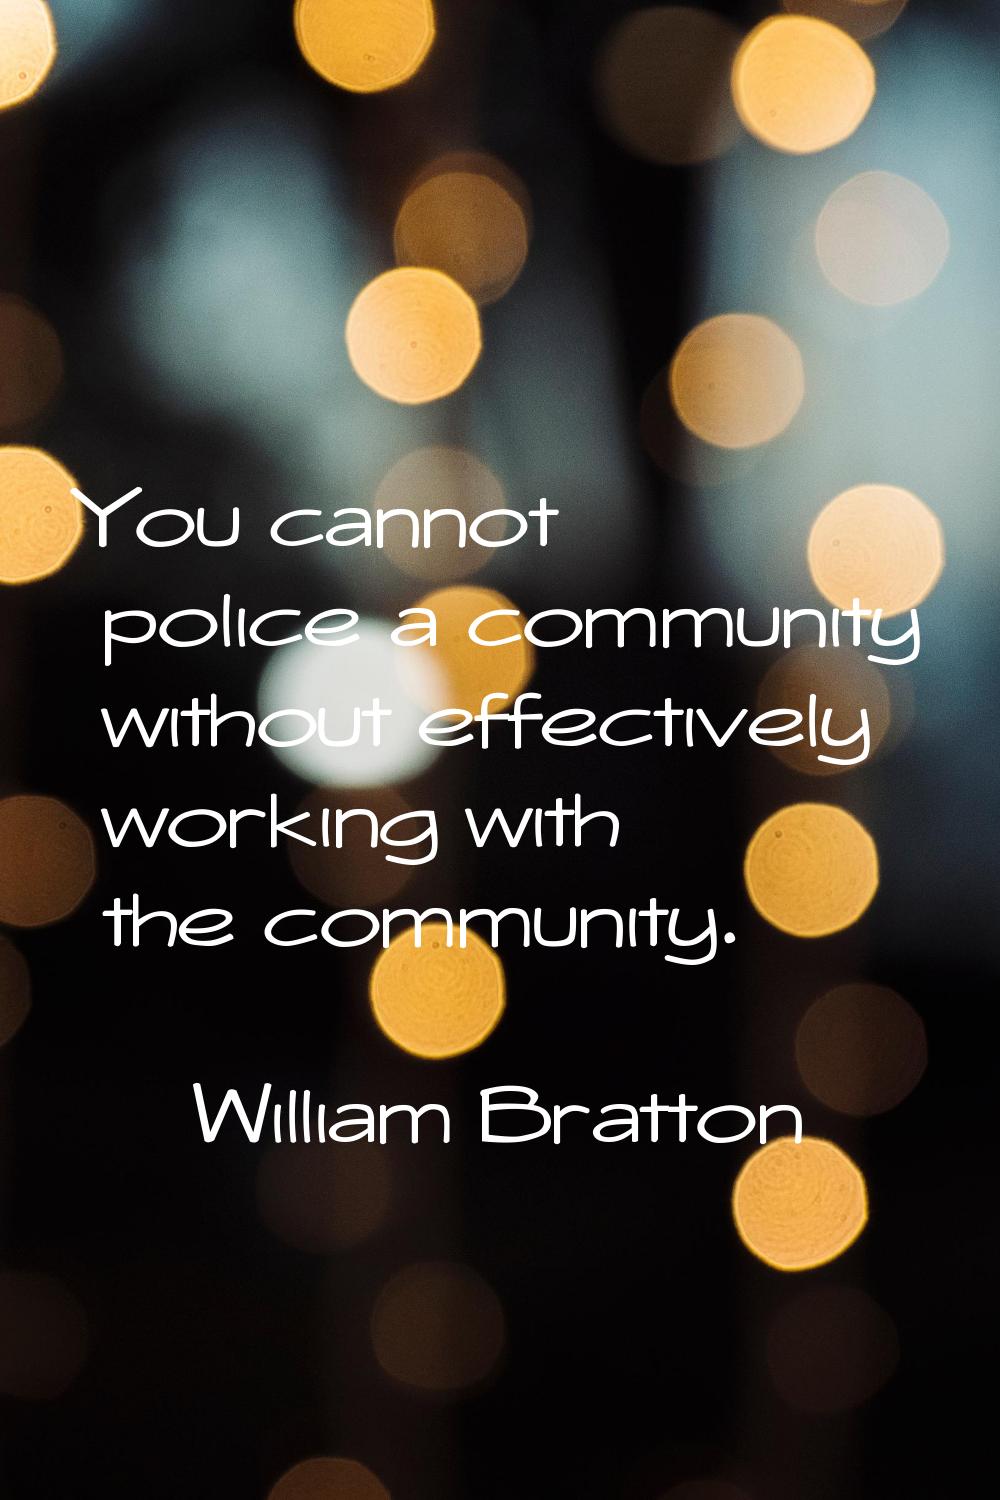 You cannot police a community without effectively working with the community.